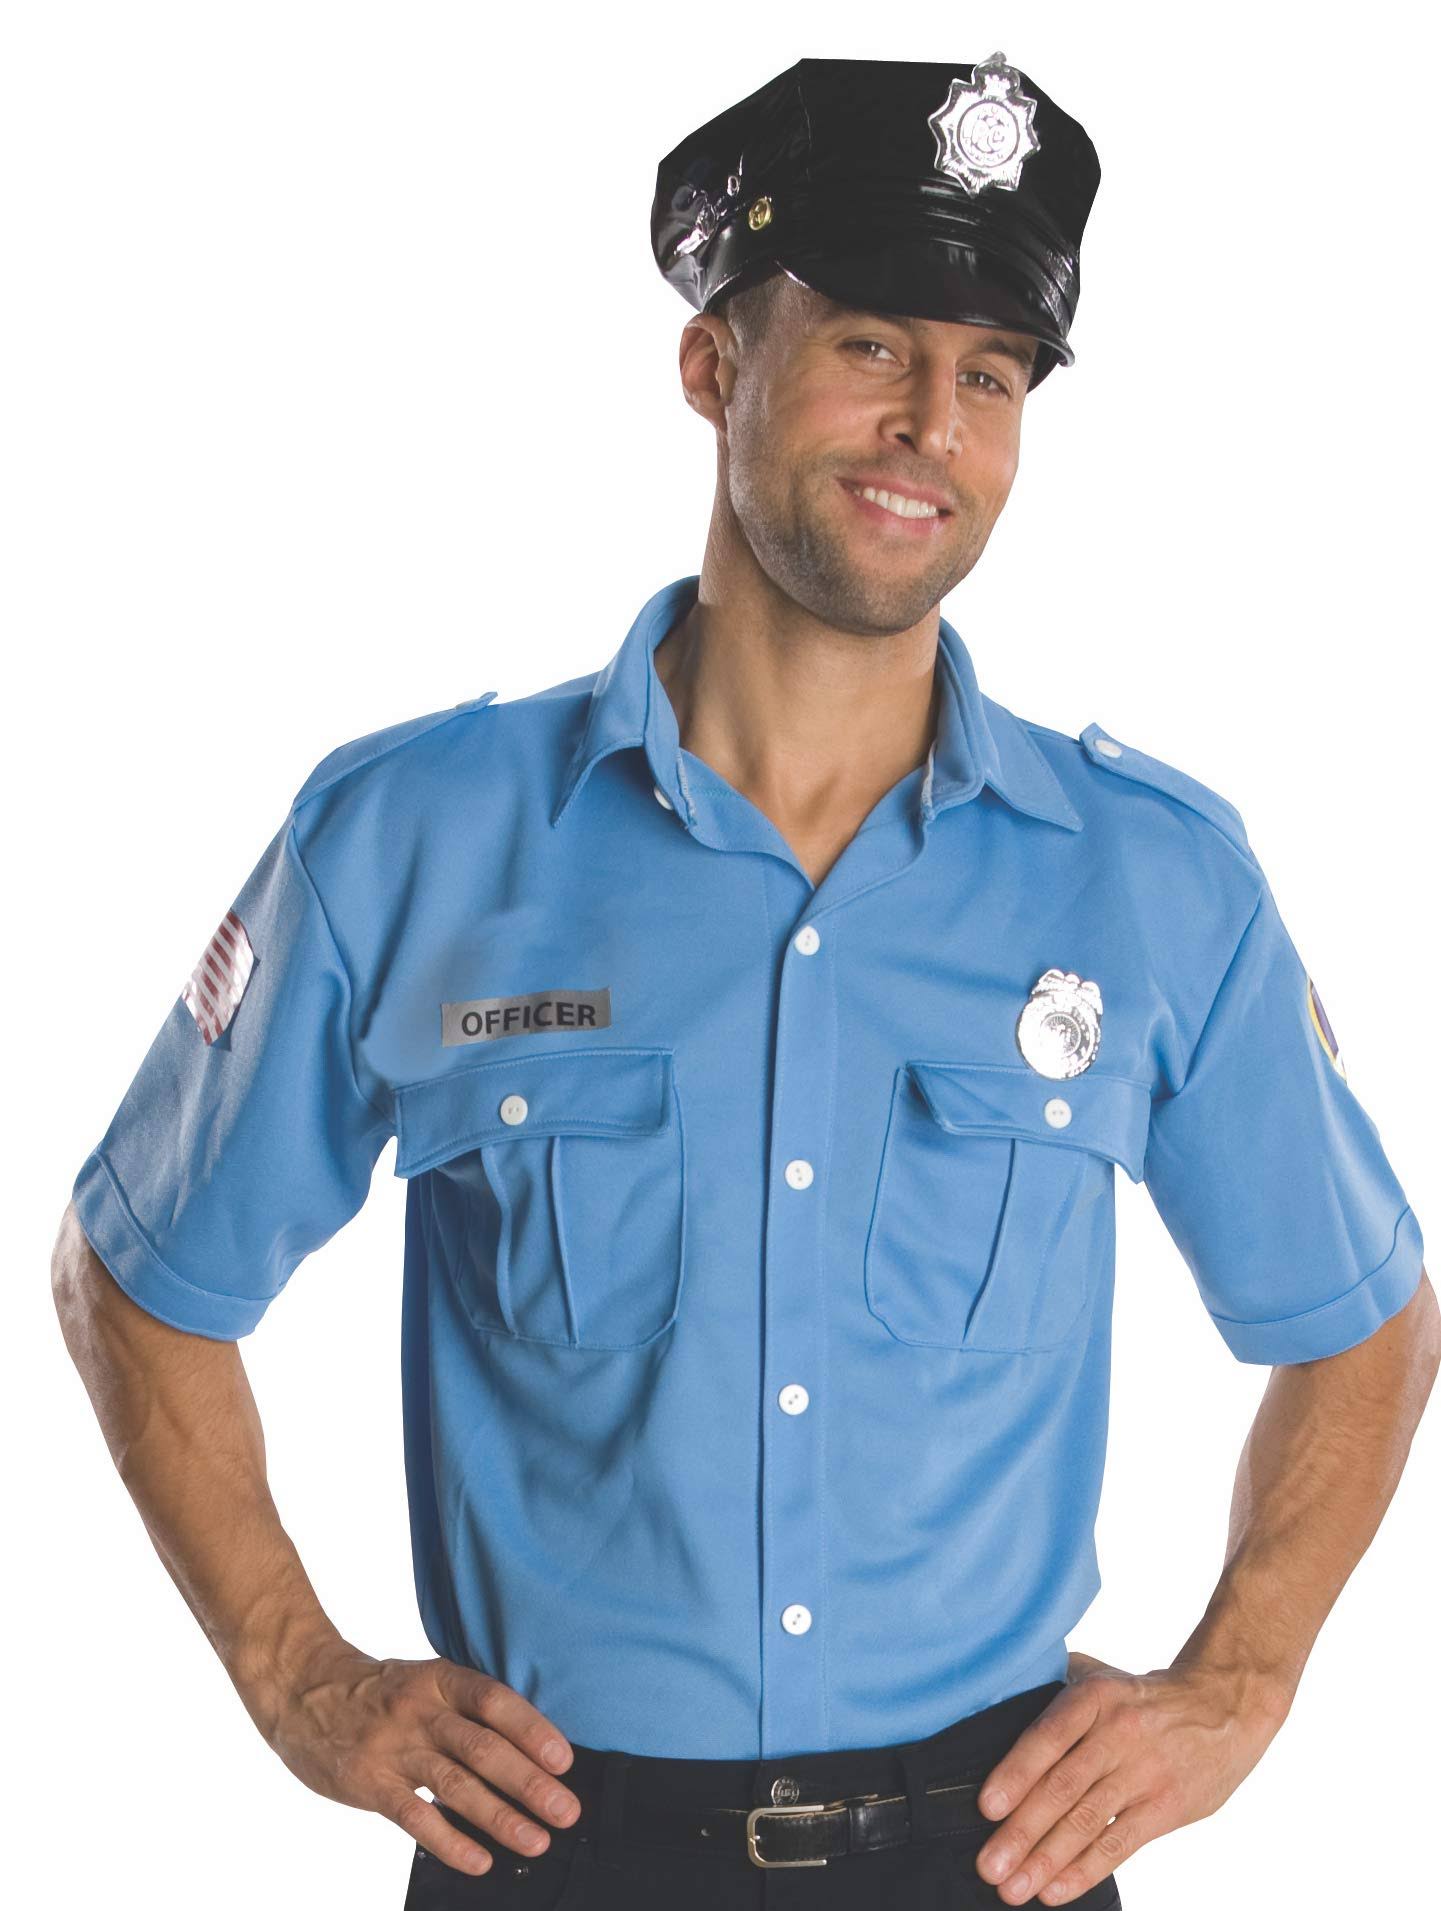 Adult Police Officer Costume